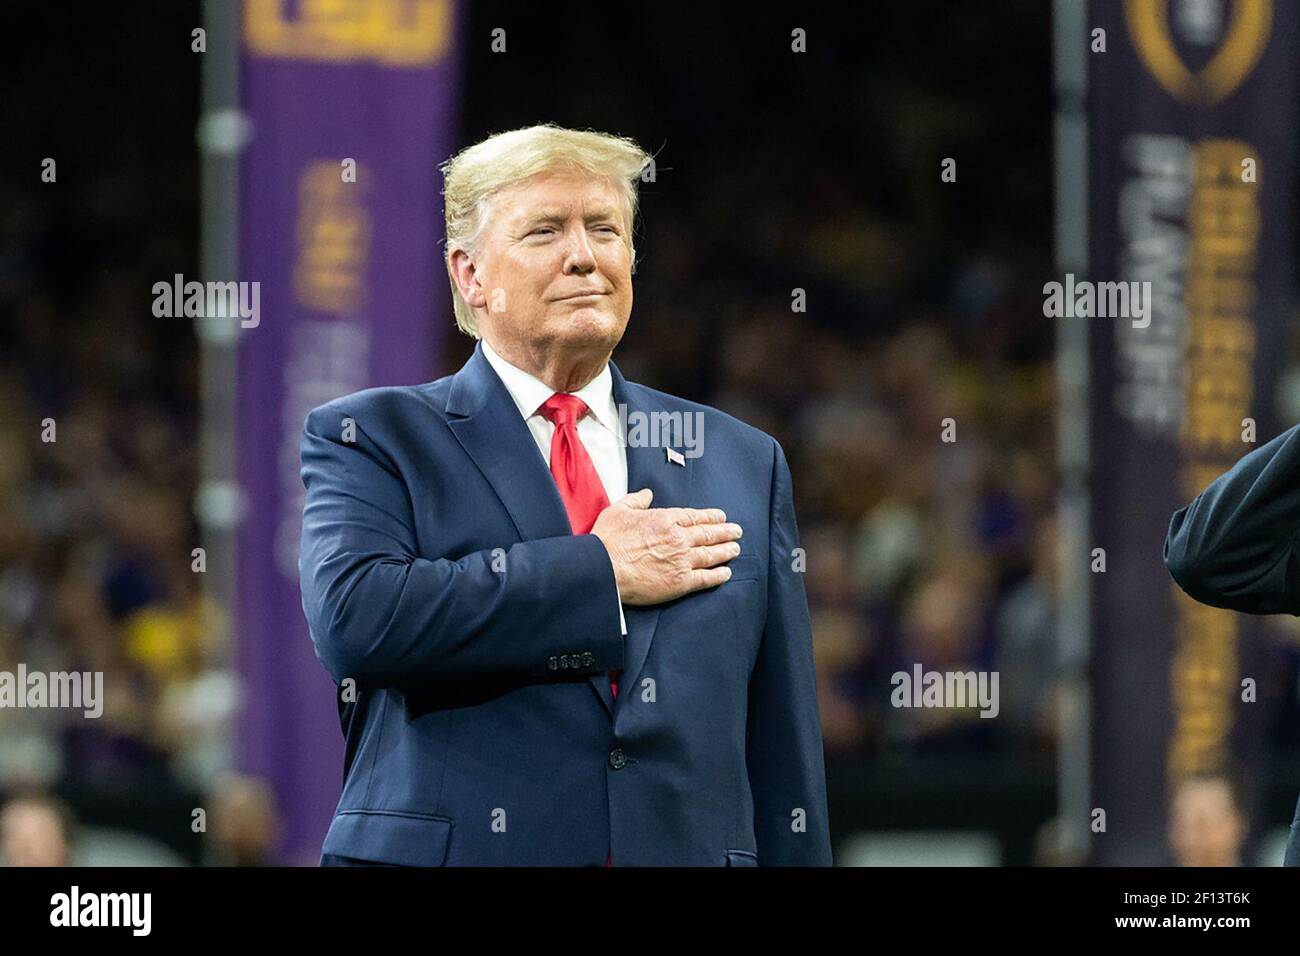 President Donald Trump participates in the National Anthem at the College Football Playoff National Championship Monday Jan. 13 2020 at the Mercedes-Benz Superdome in New Orleans. Stock Photo